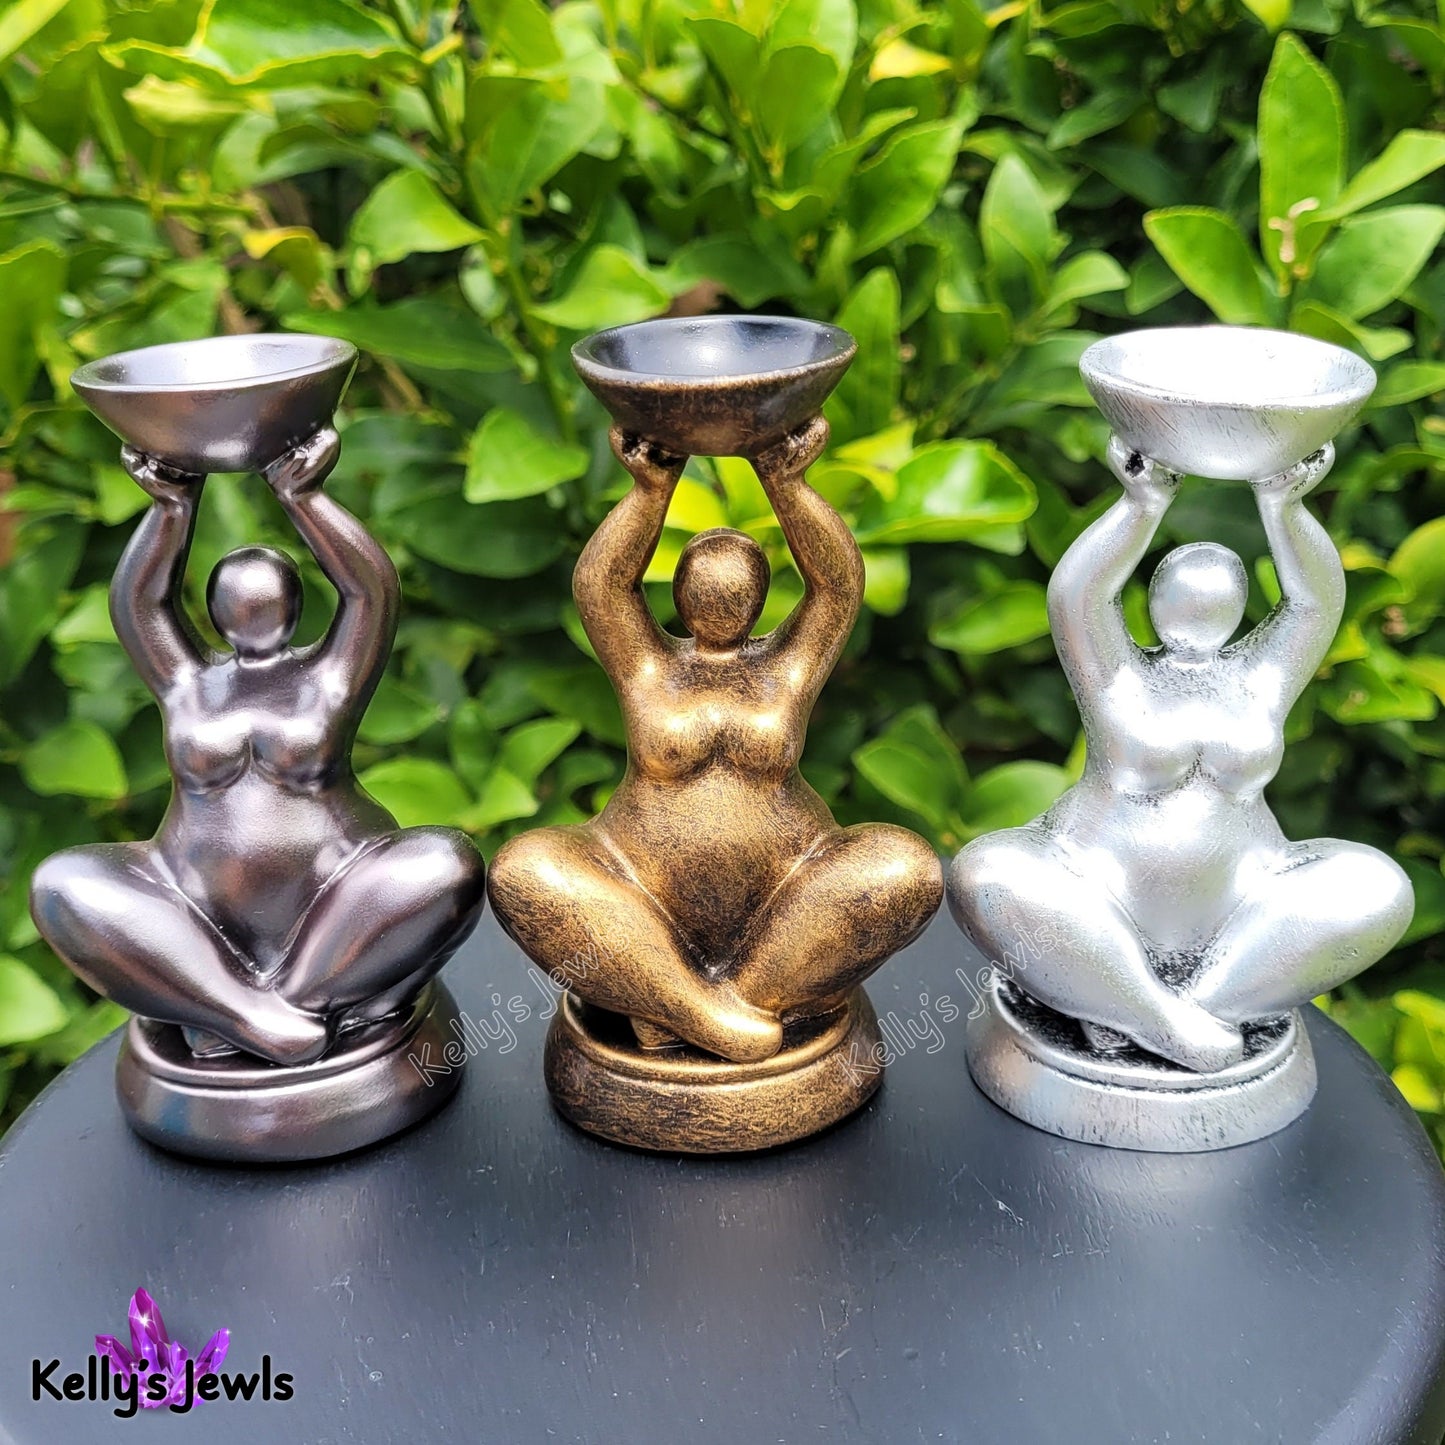 Woman Goddess Sphere Display Stand for Crystal Balls or Eggs 2" to 4" (51mm to 102mm)